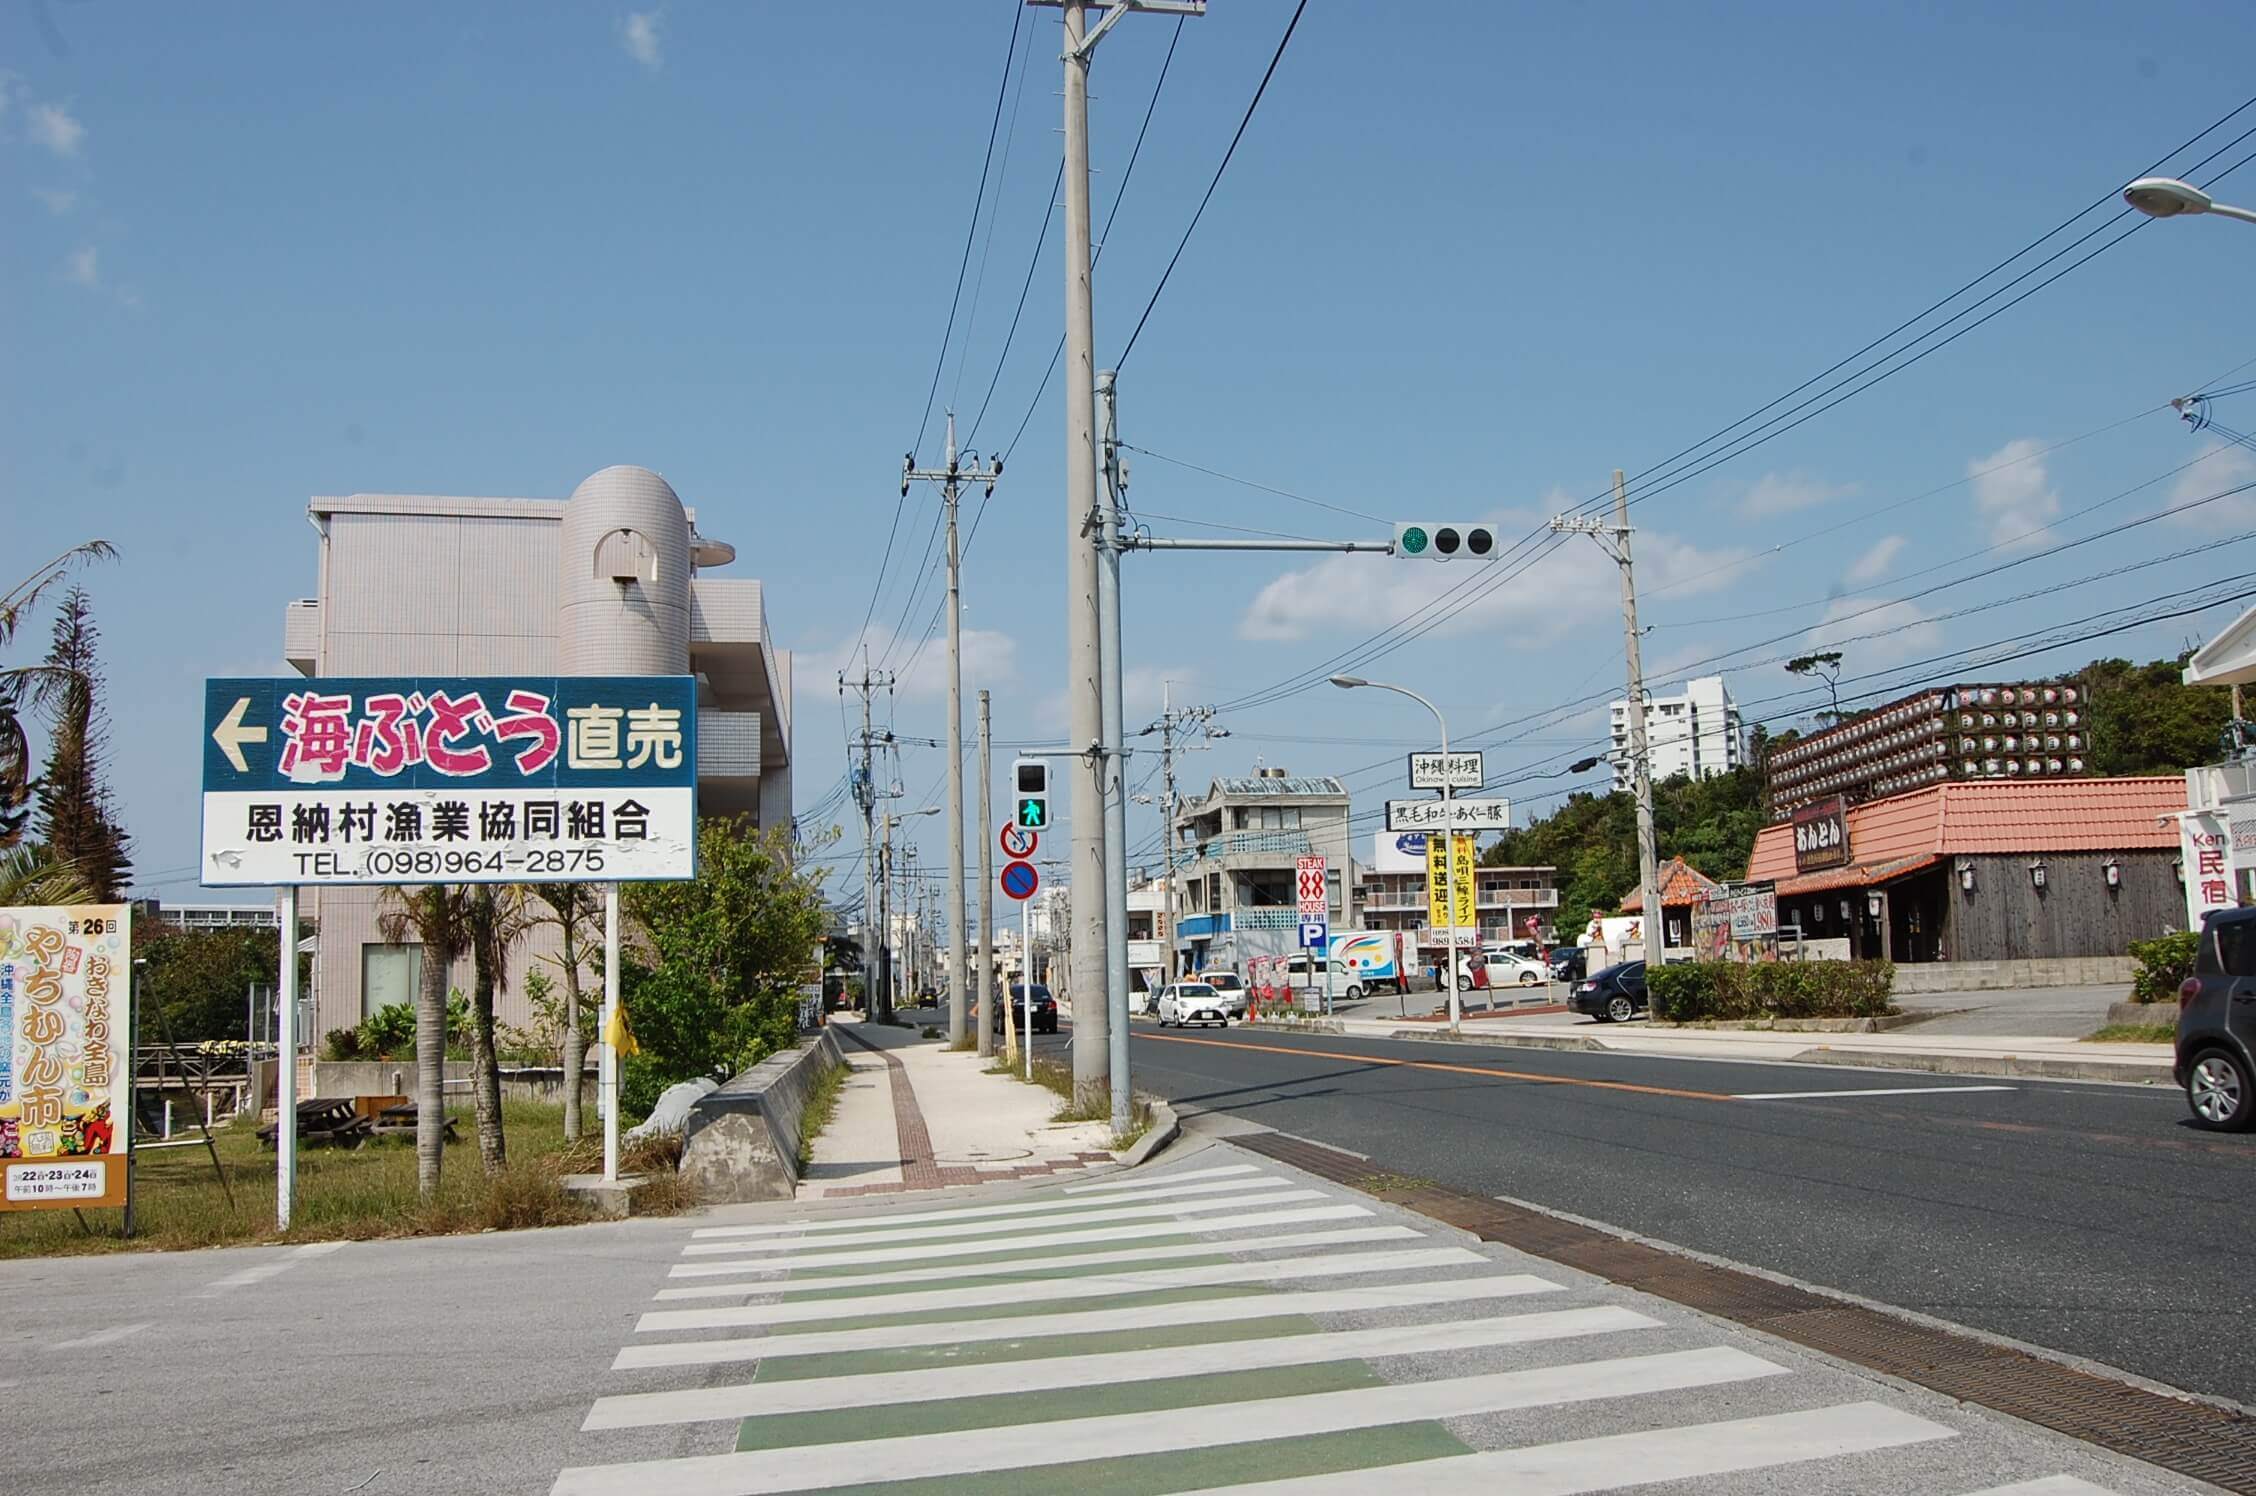 The meeting location is Maeganeku Fishing Port, which is about an eight-minute drive from the Okinawa Expressway's Ishikawa exit.